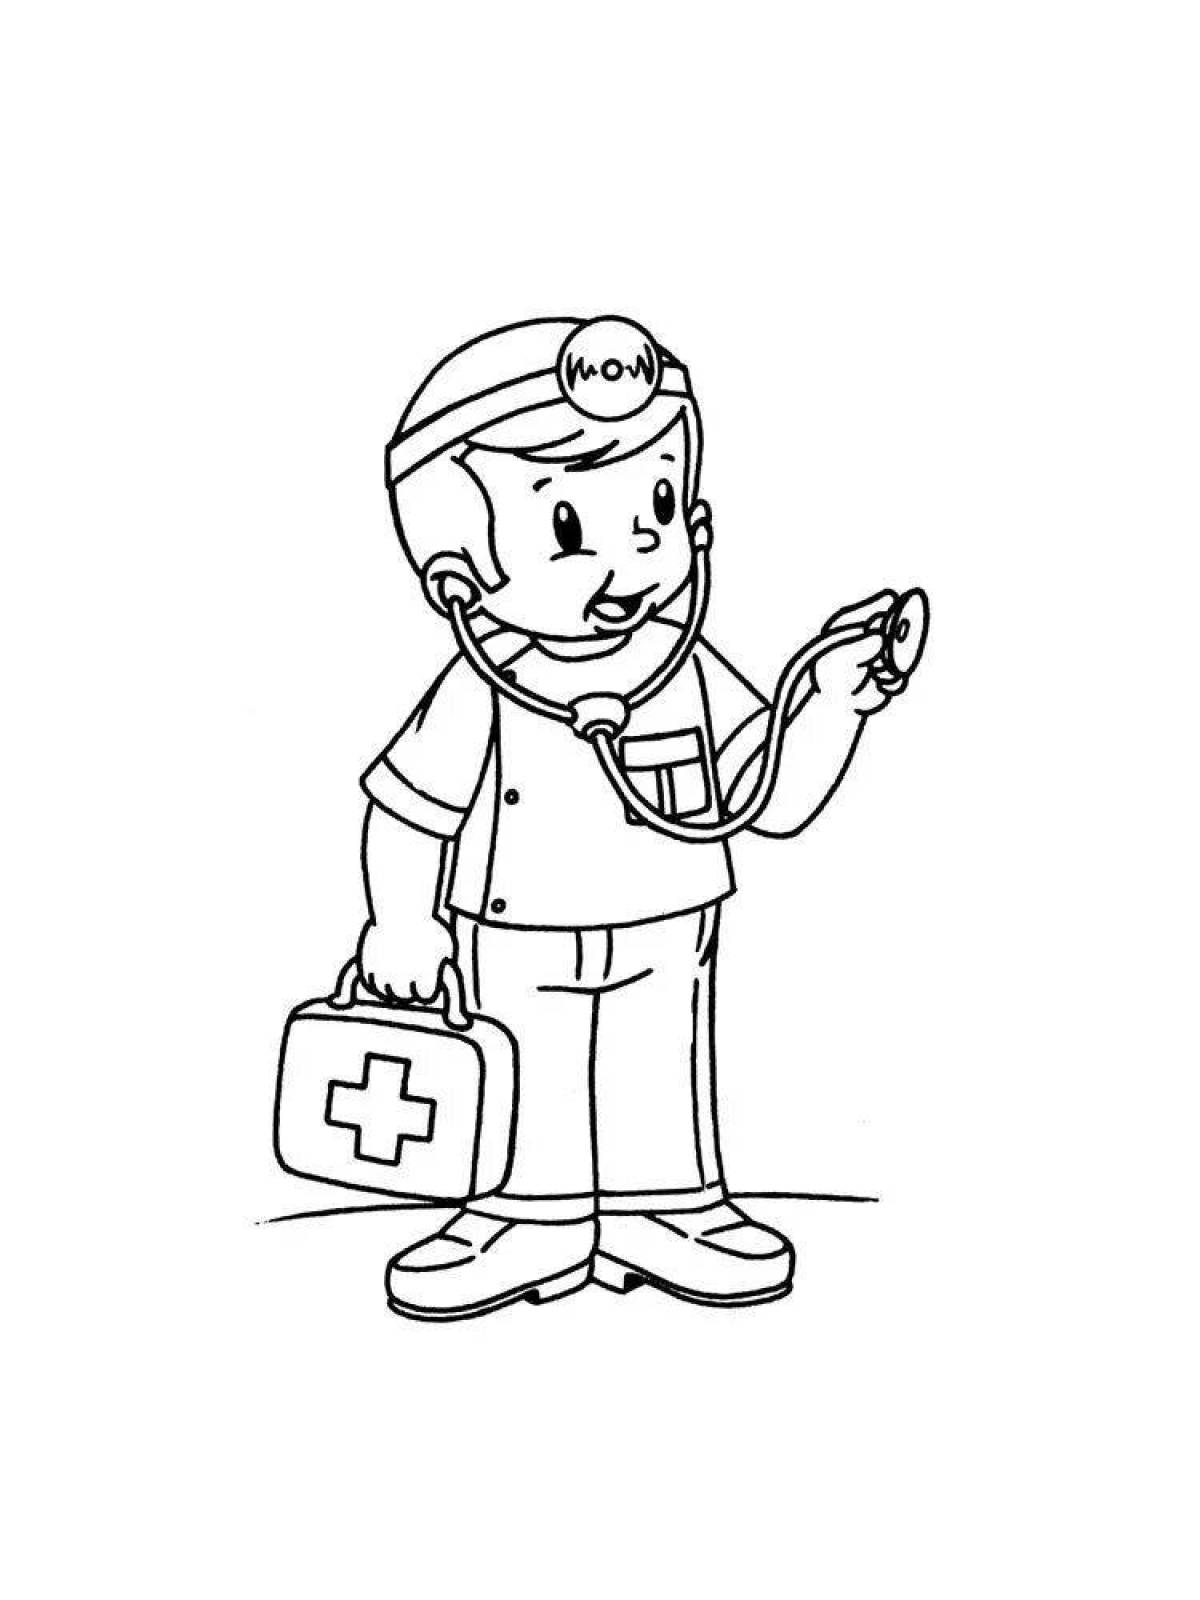 Coloring book charming doctor profession